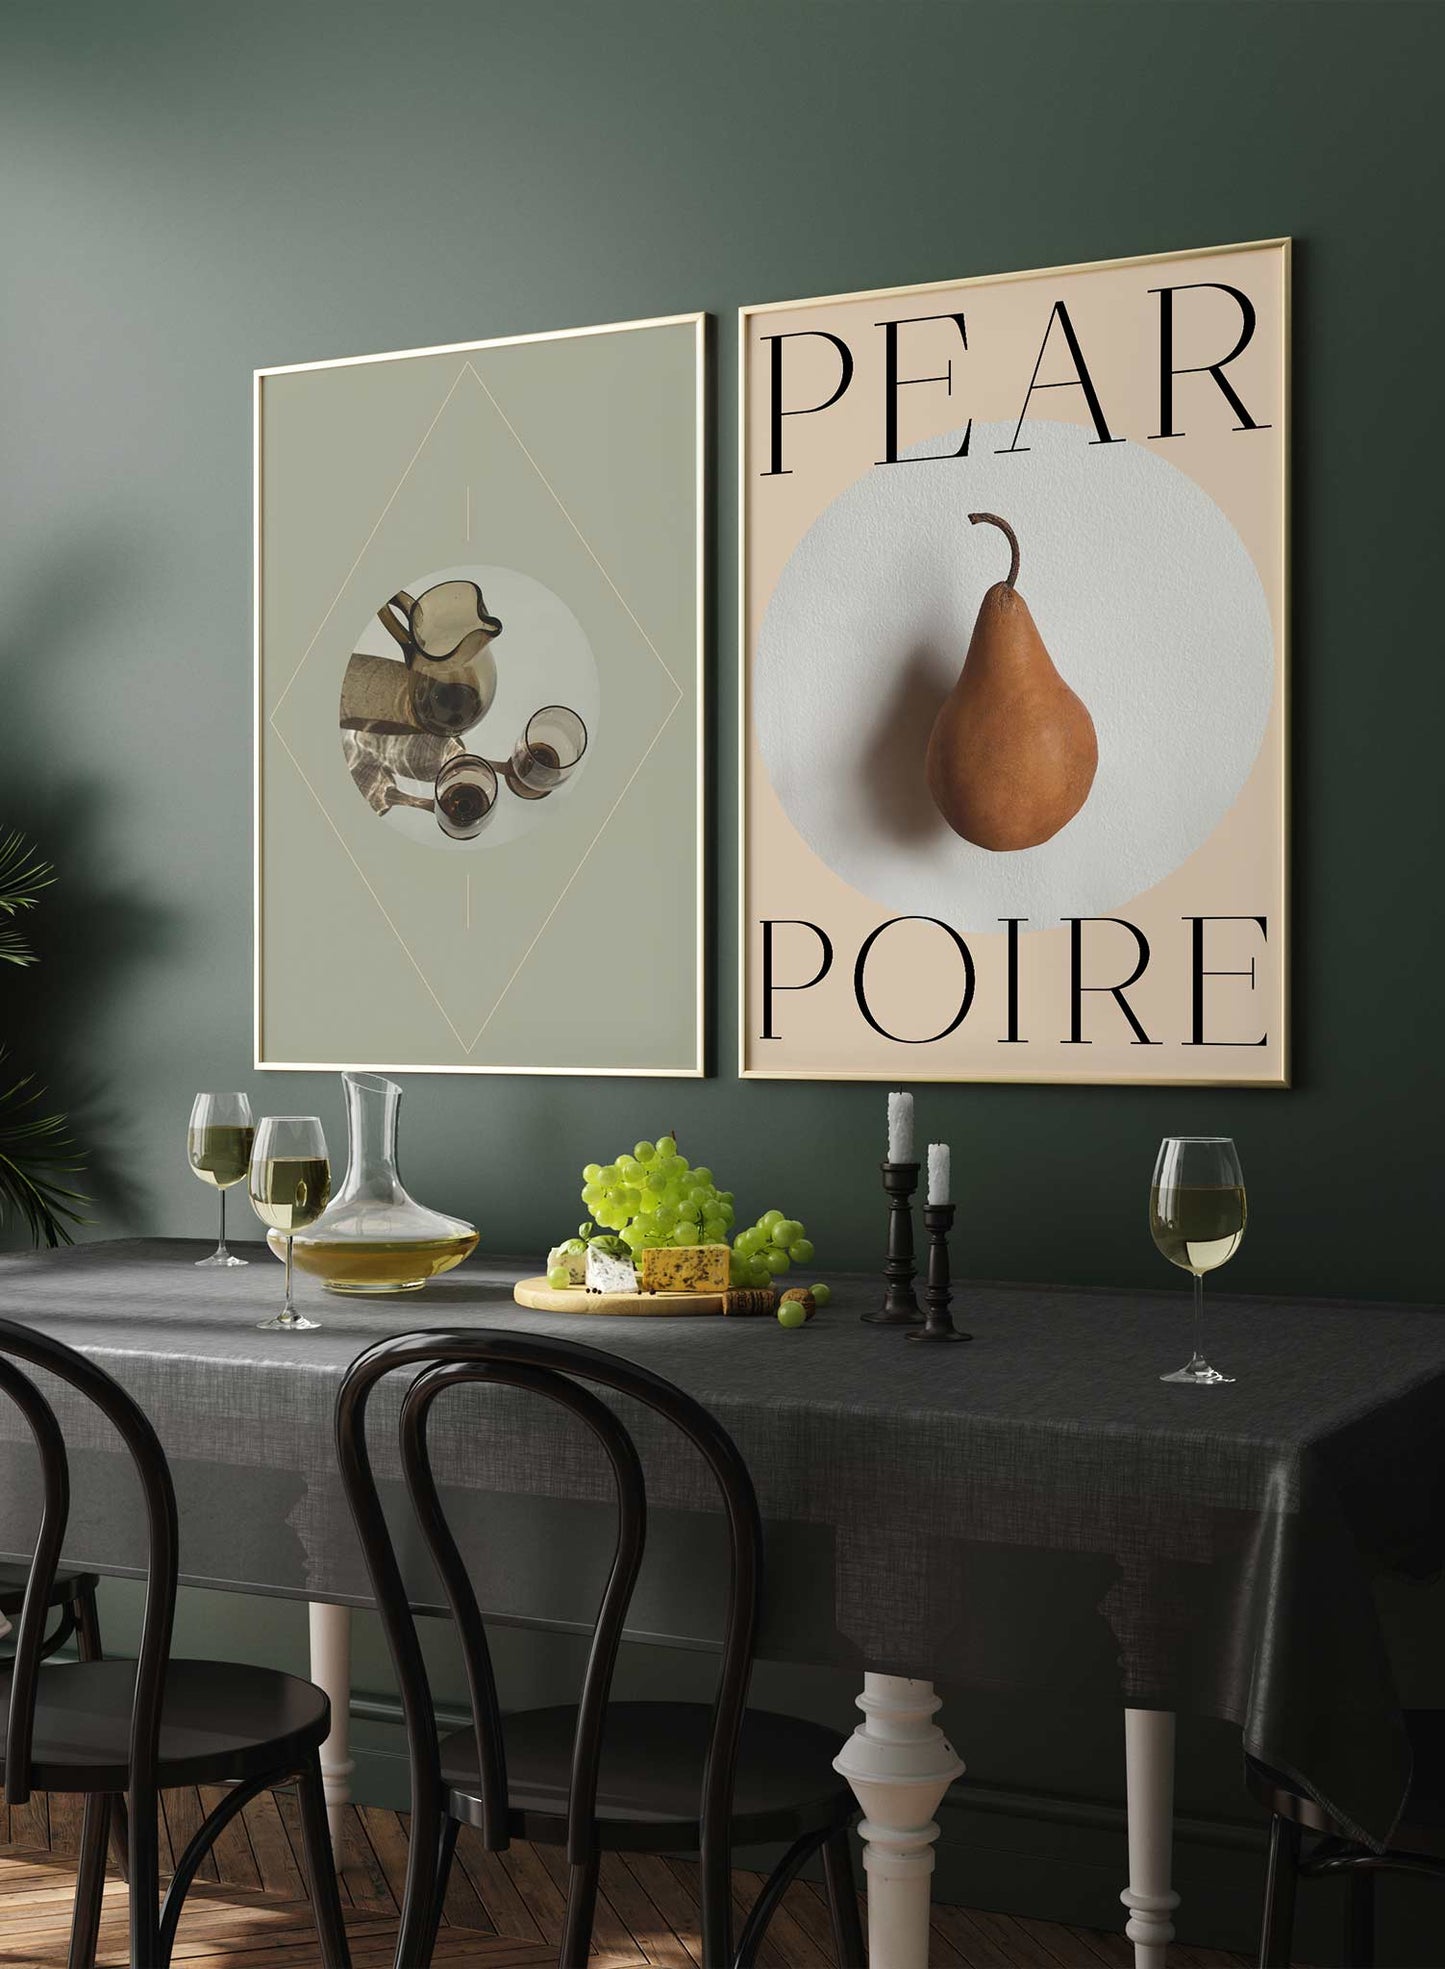 Perfect Pear is a still life fruit photography and typography poster by Opposite Wall.